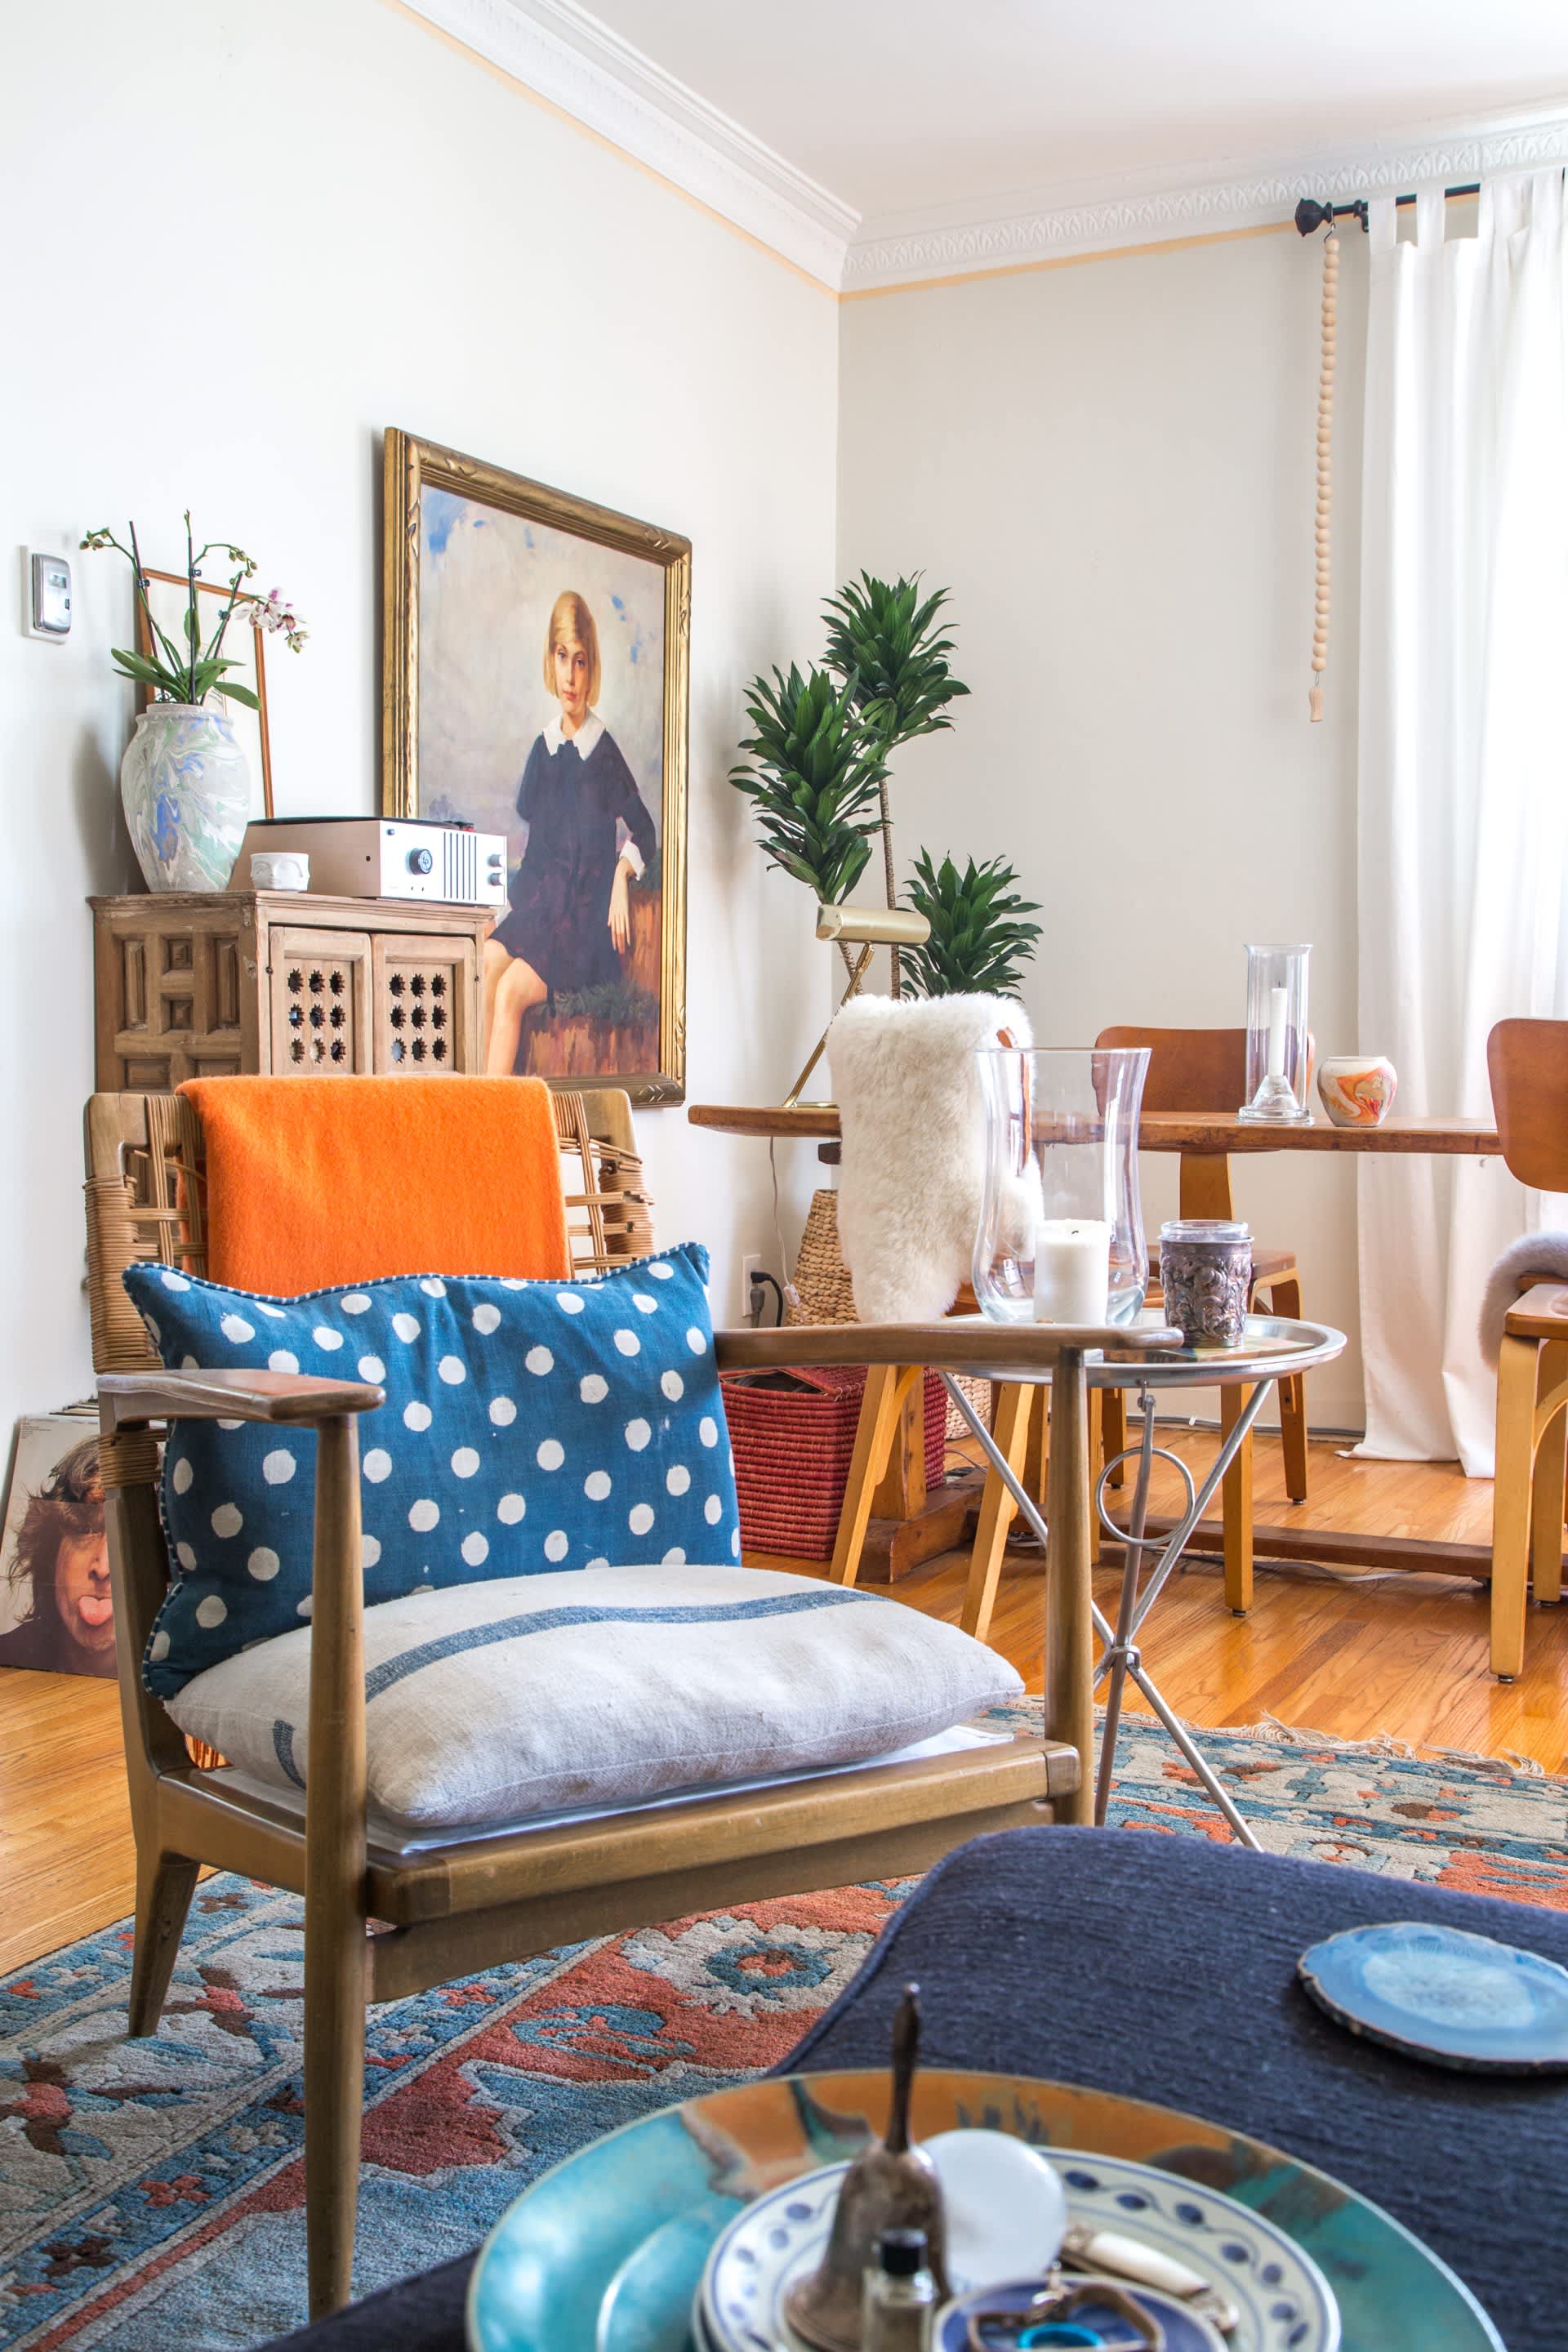 Savannah’s Eclectic Emotional Home | Apartment Therapy